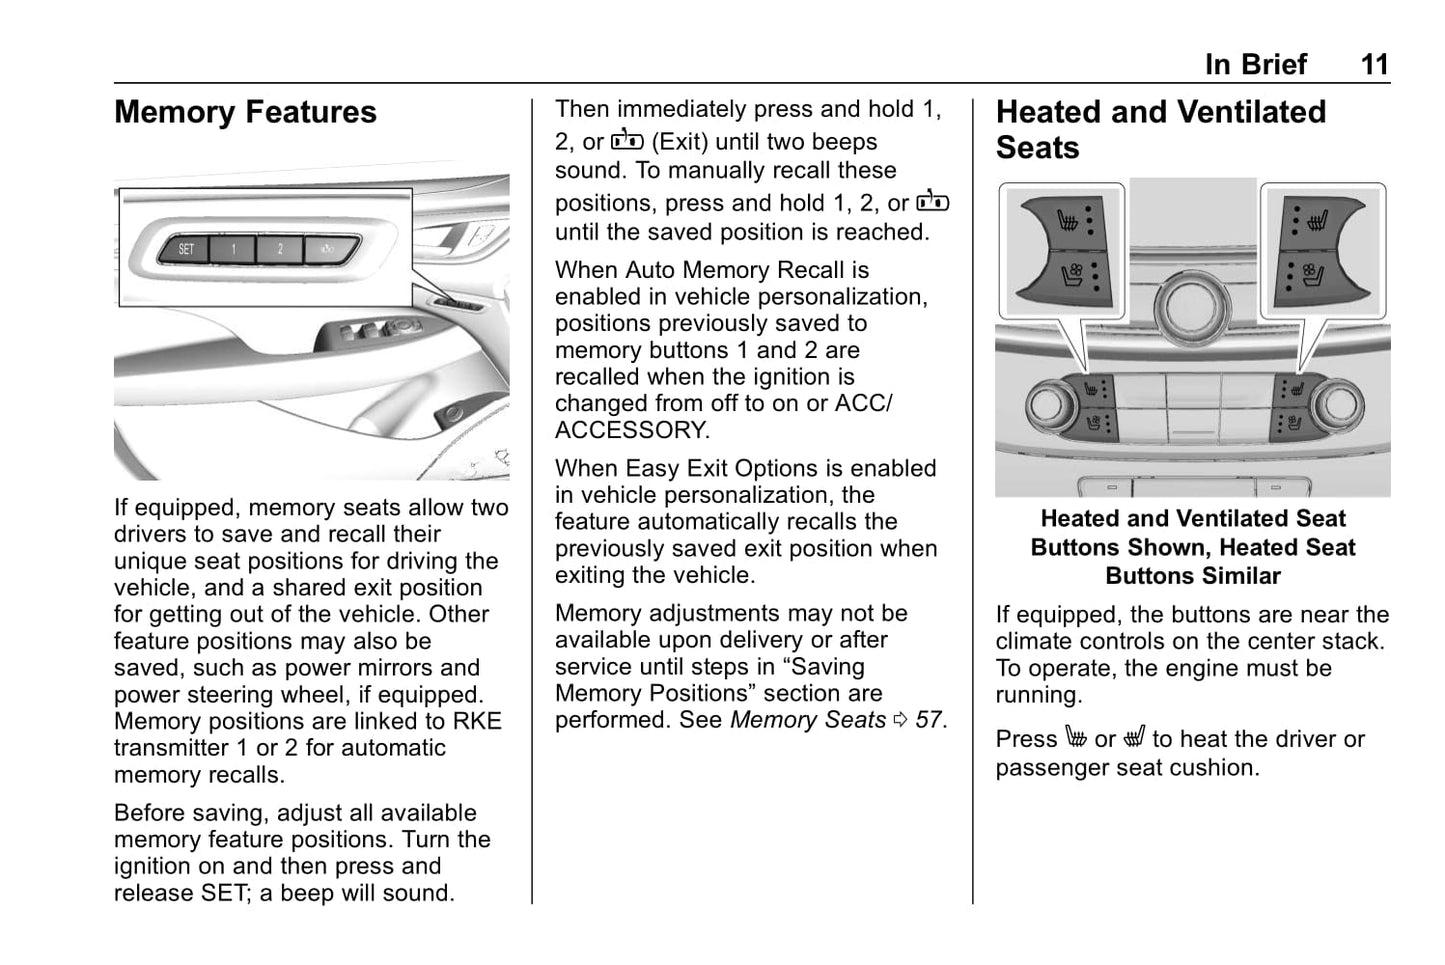 2020 Buick LaCrosse Owner's Manual | English